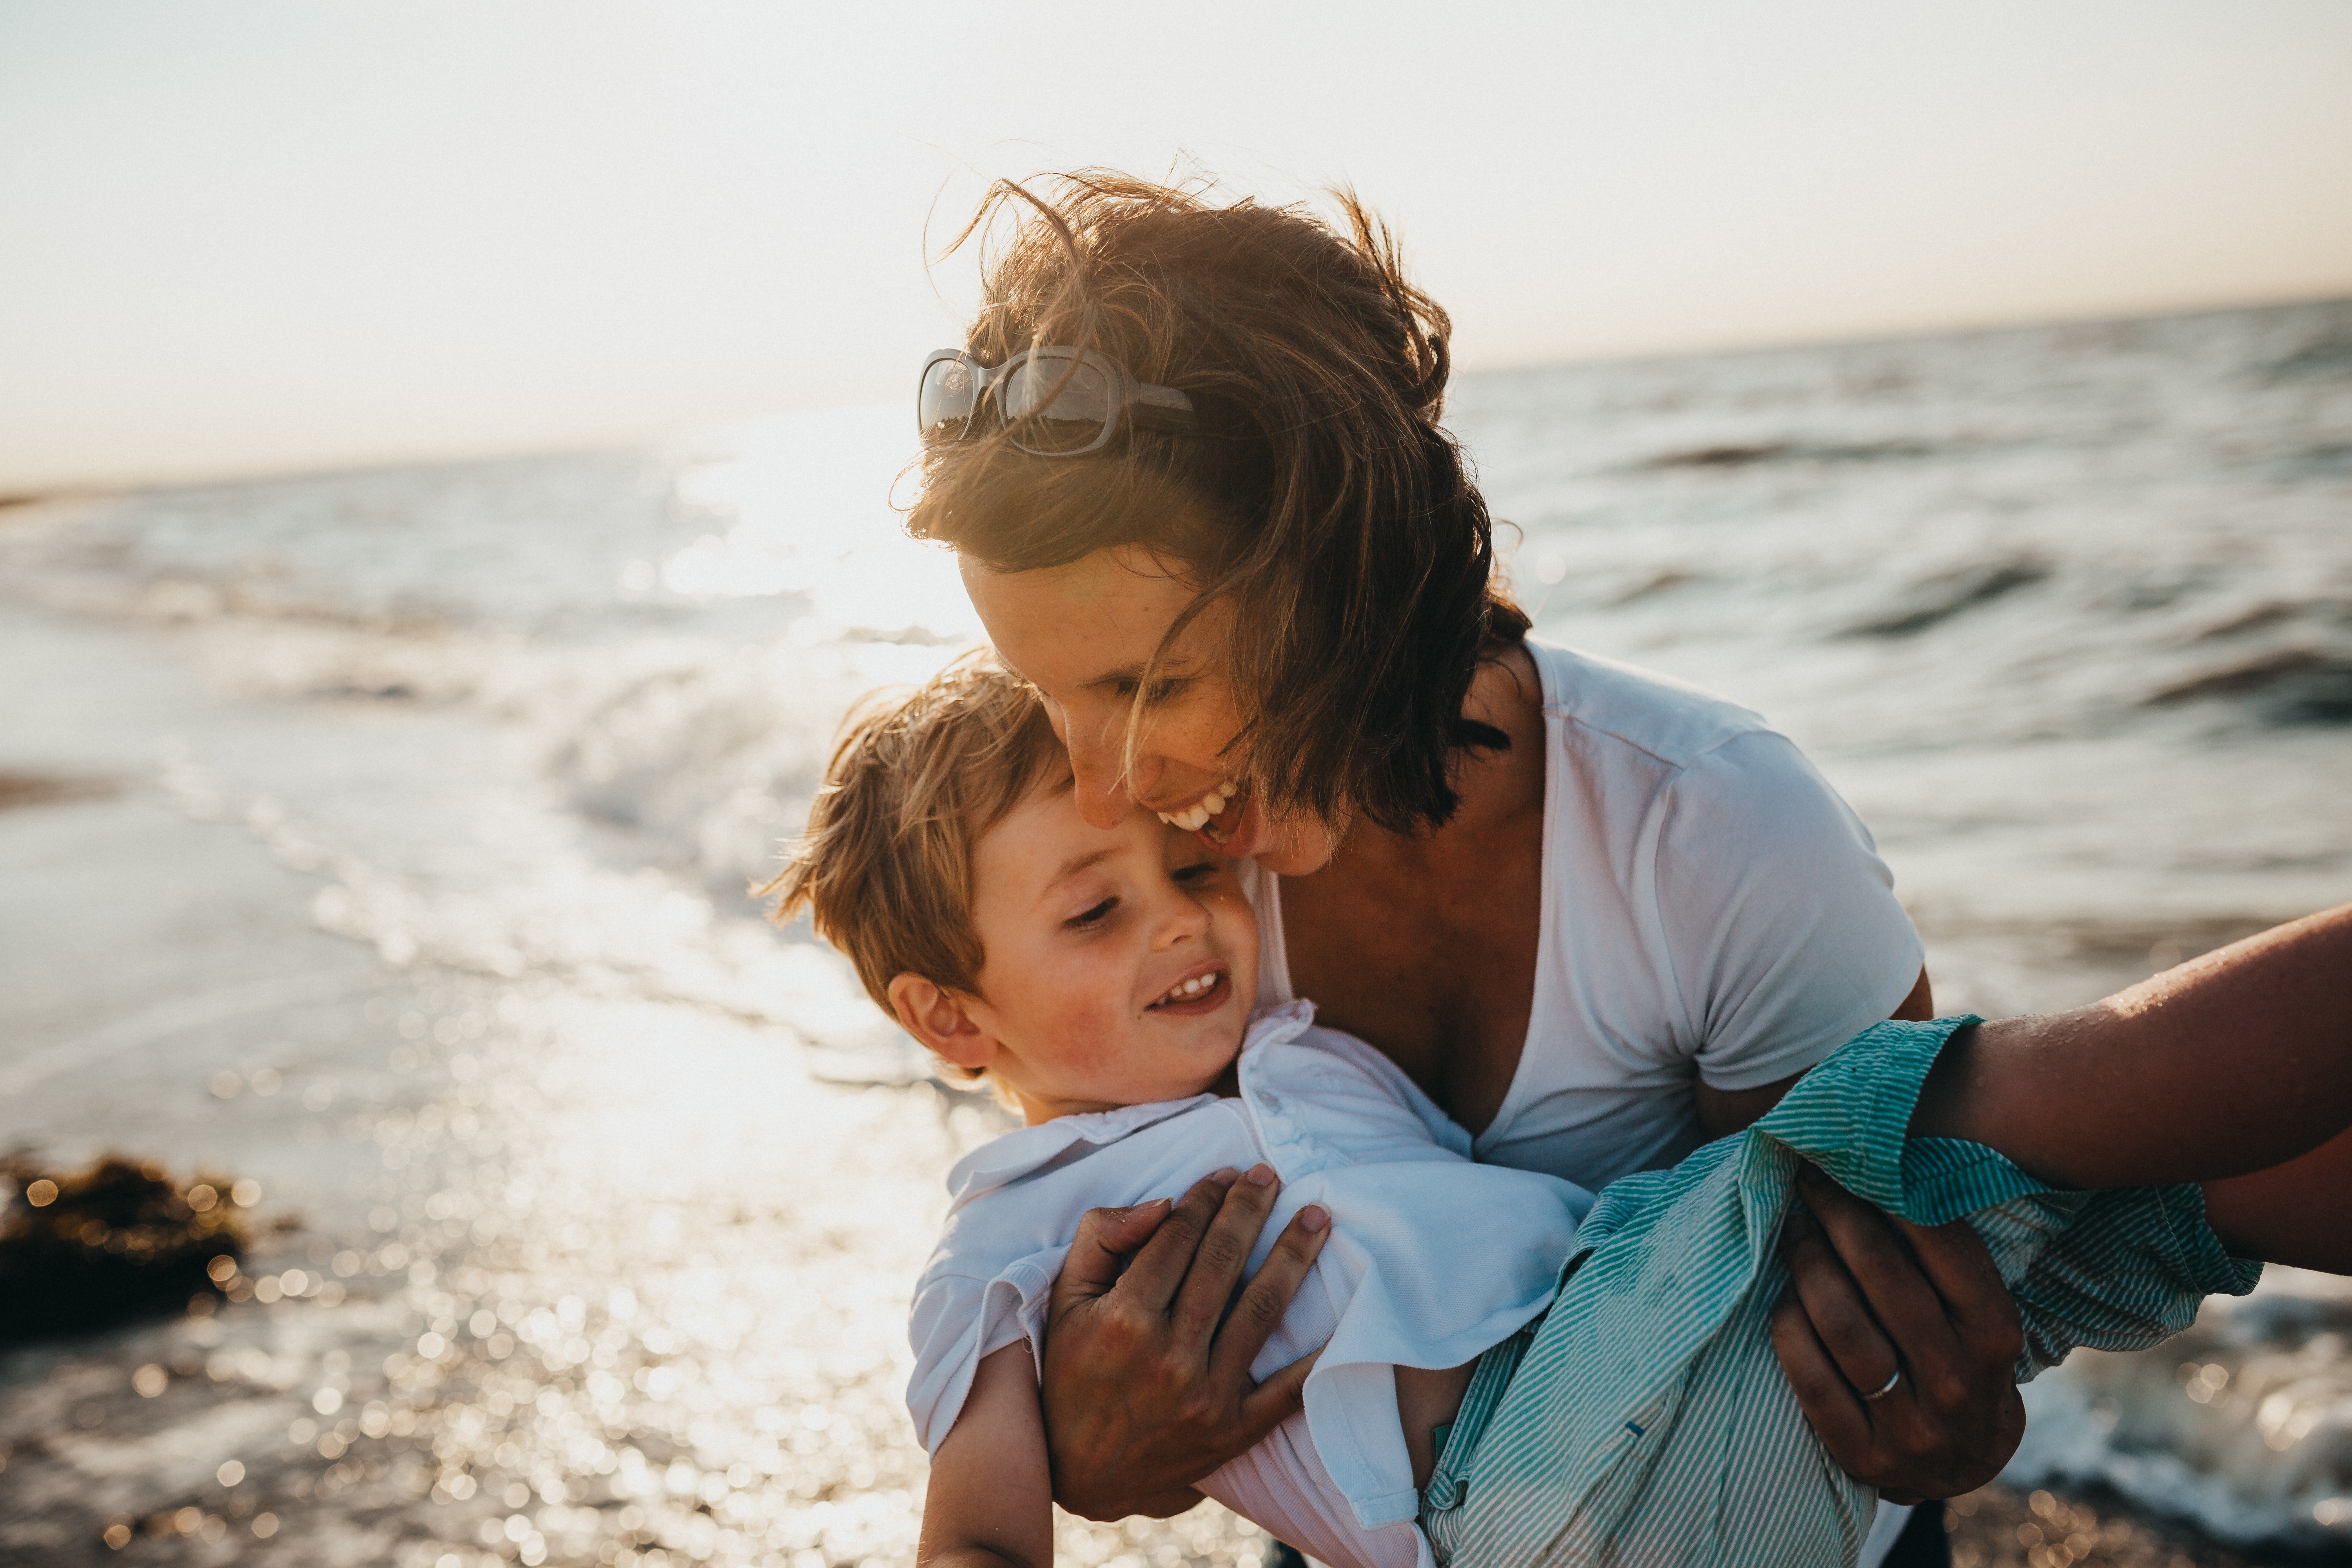 Carol was divorced and had raised her only son alone. | Source: Unsplash